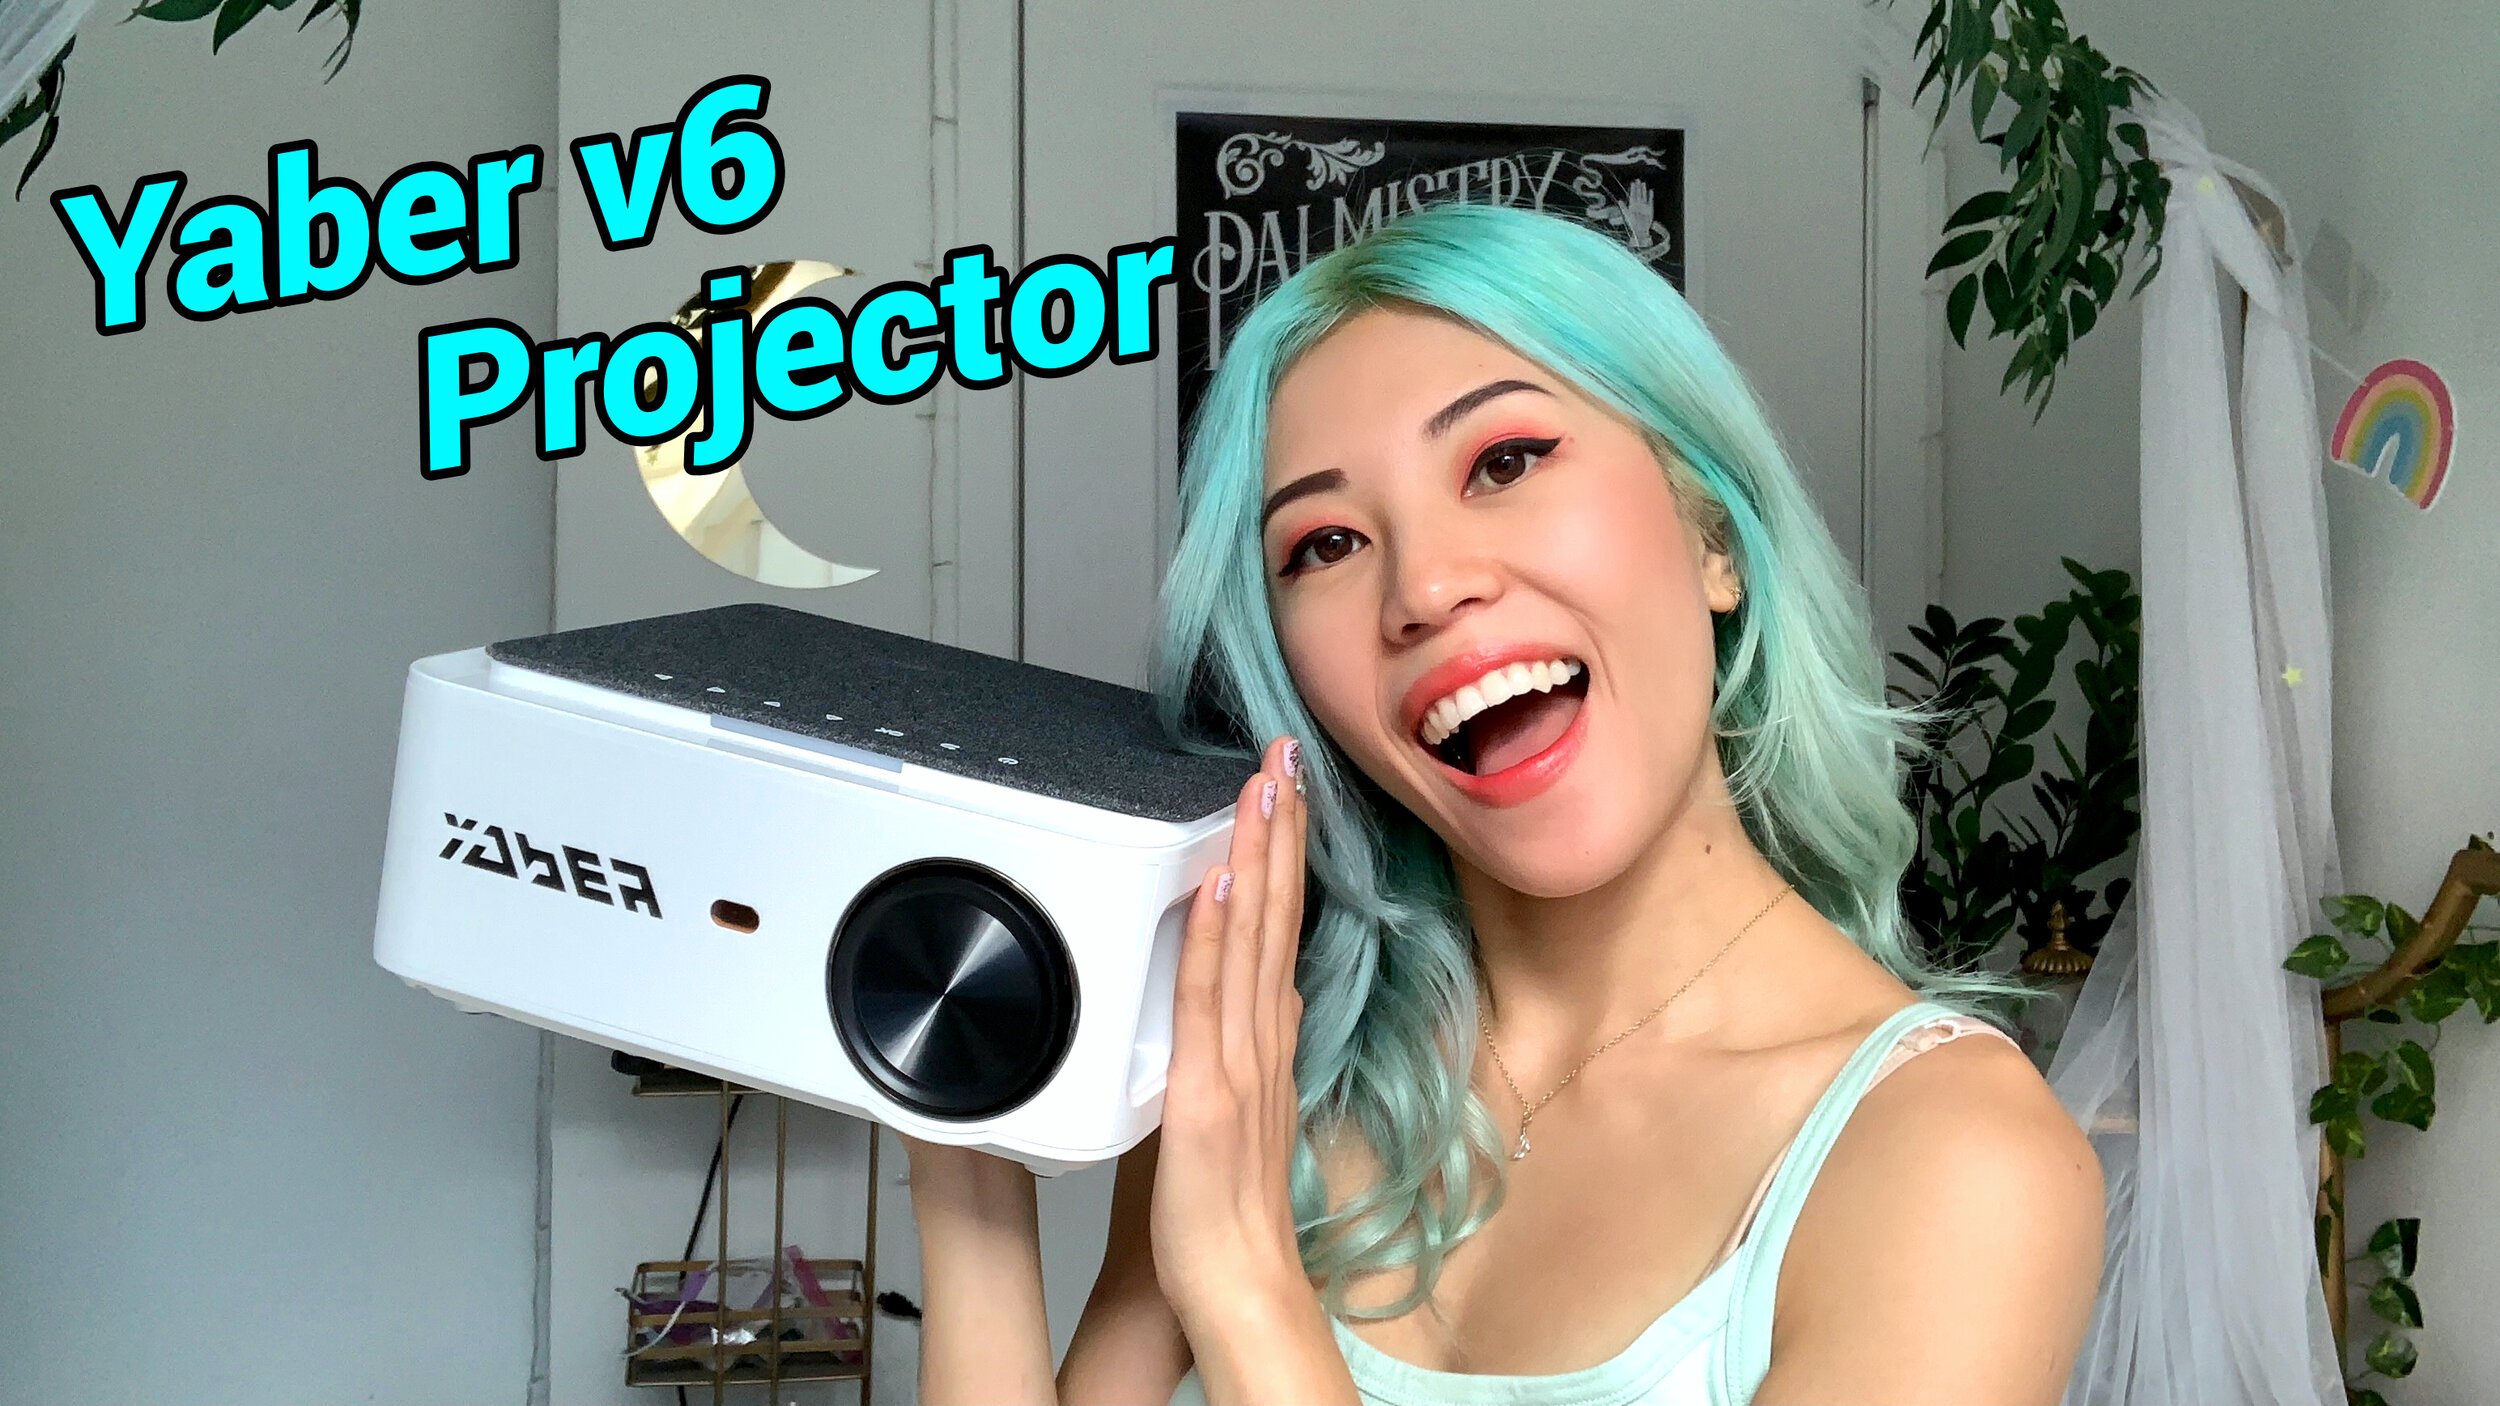 Yaber V6 1080P Native Full HD Wifi Bluetooth Budget Projector Review — HUE